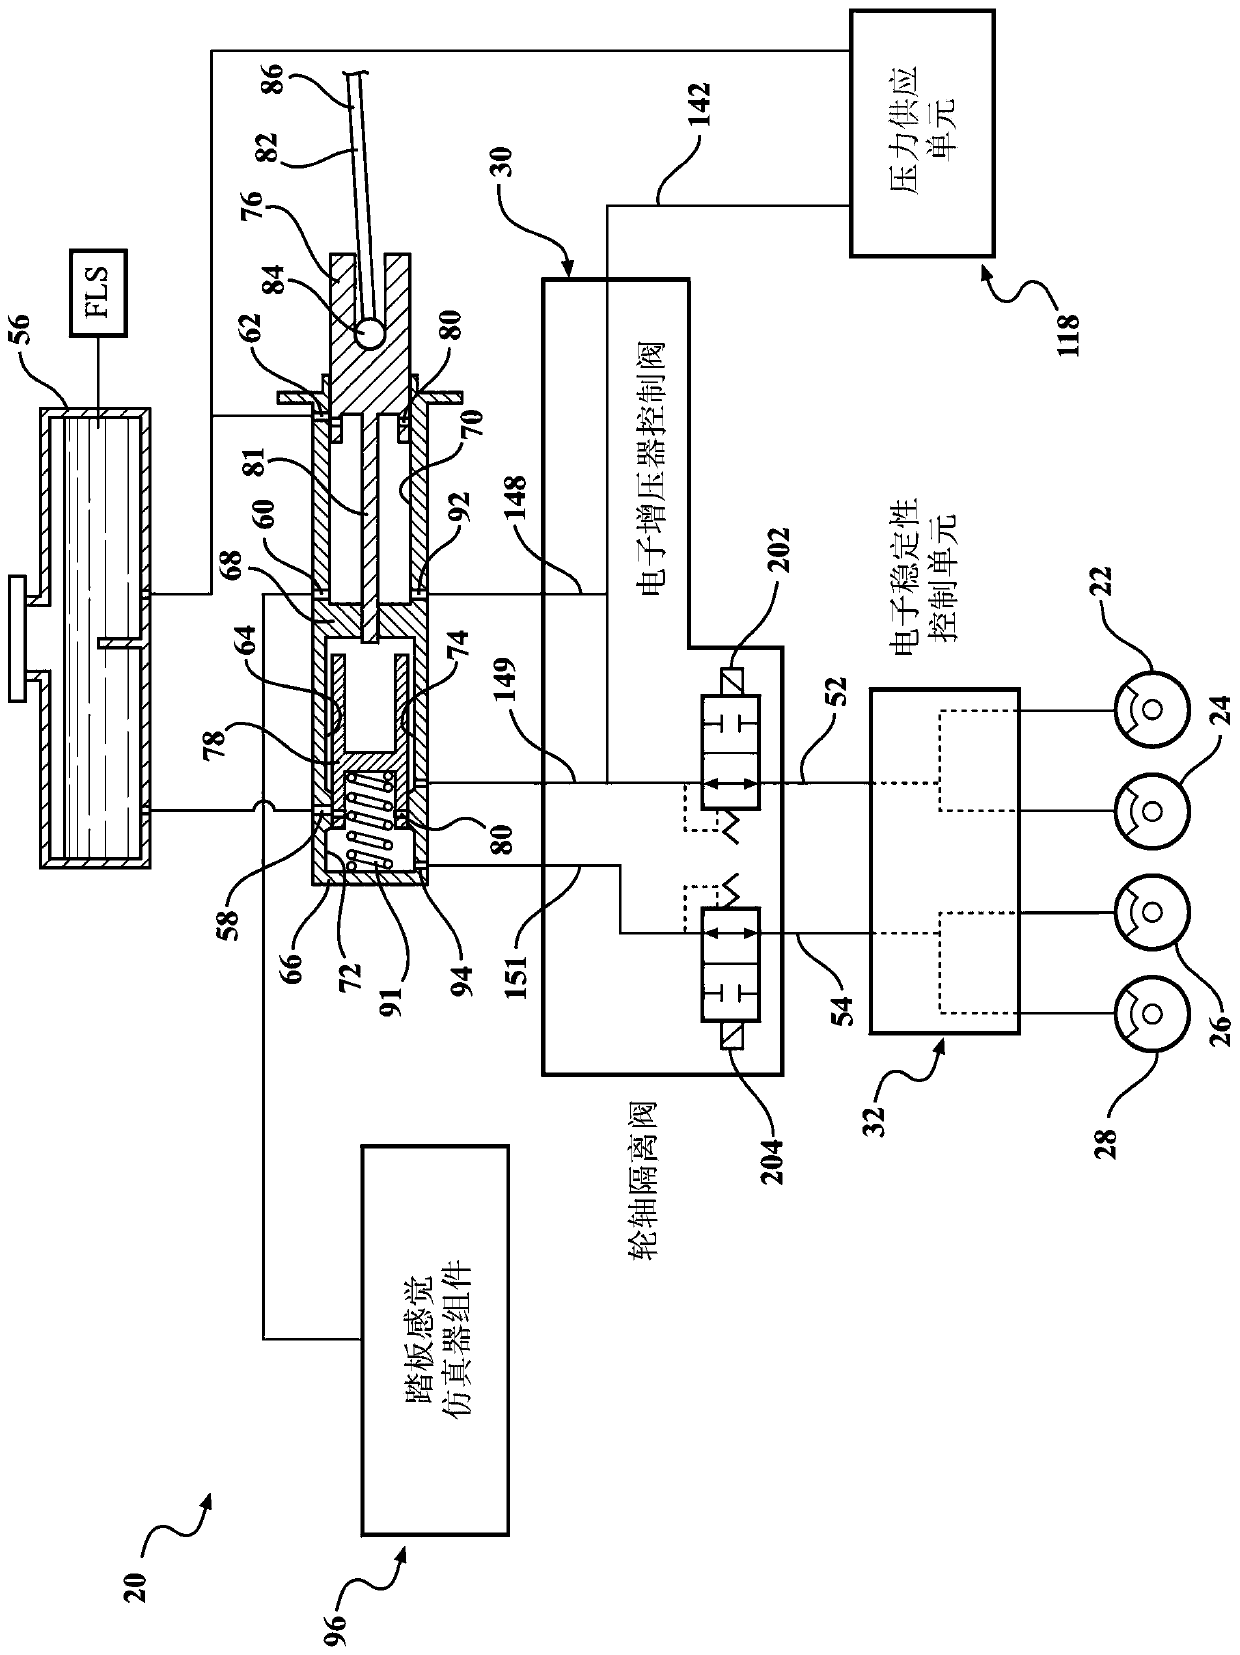 An electro-hydraulic braking system and a method for preventing wheels of a vehicle from slipping by using the electro-hydraulic braking system